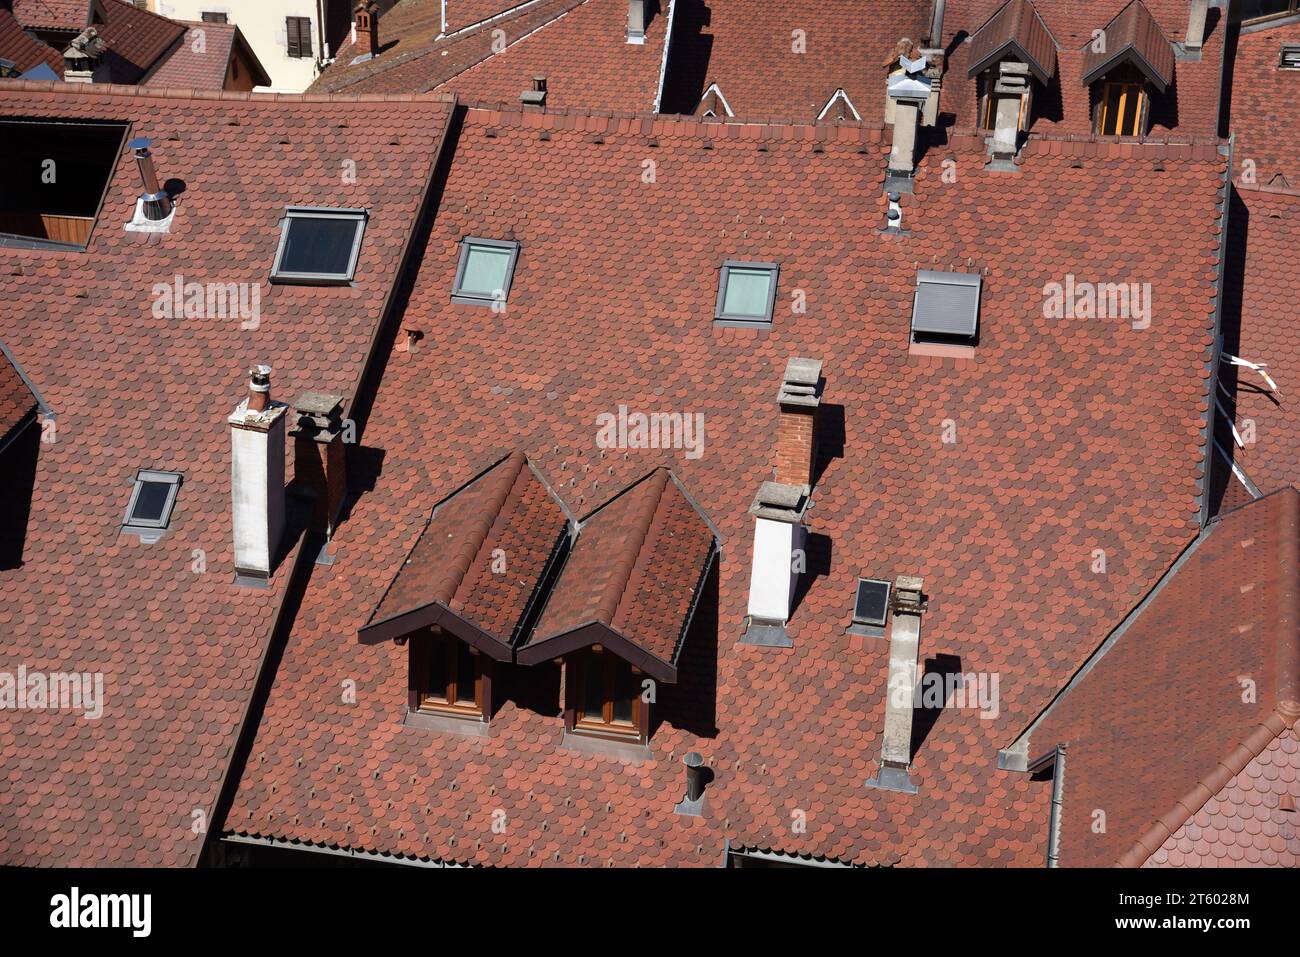 Typical Scalloped Roof Tiles, Tall Chimneys, Roof Windows, Dormer Window & Rooftops of the Old Town or Historic District of Annecy Haute Savoie France Stock Photo